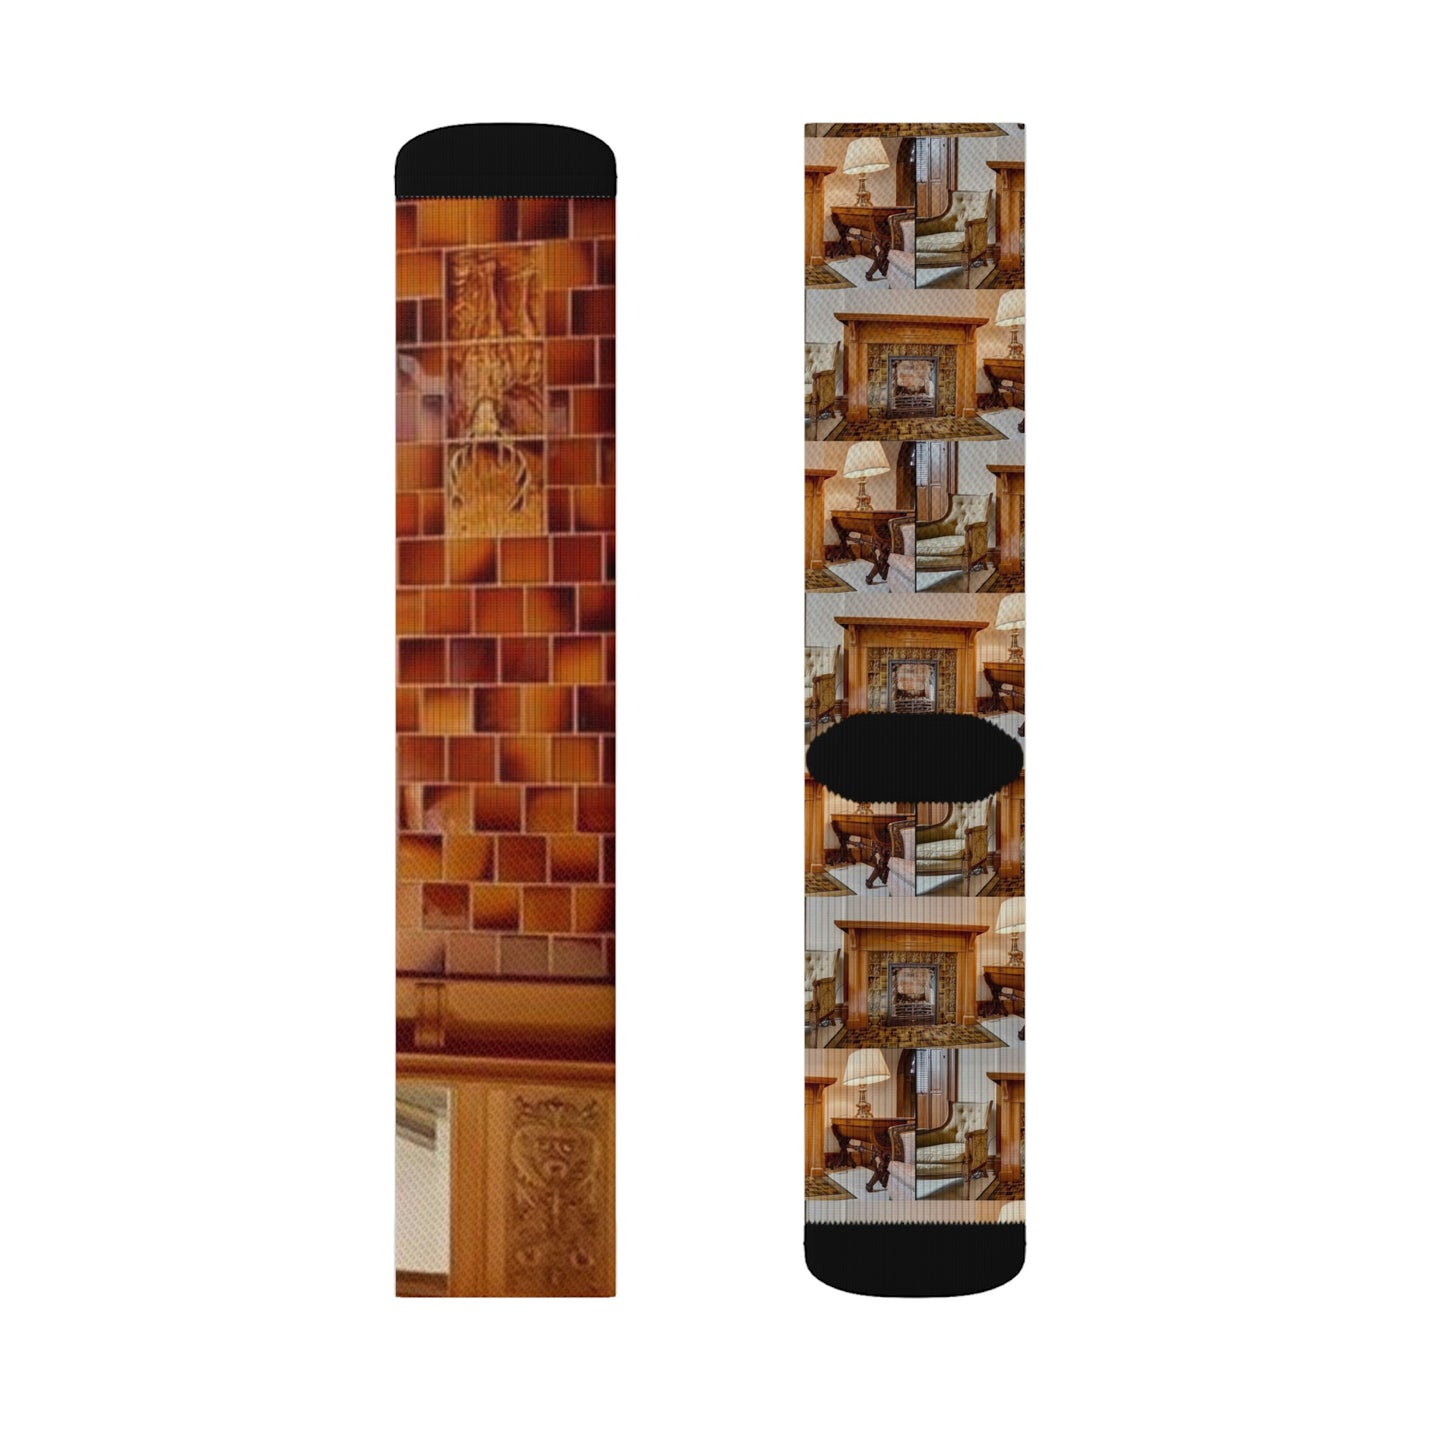 904 S Main 45840 Housing Boom Amber Fireplace Sublimation Socks